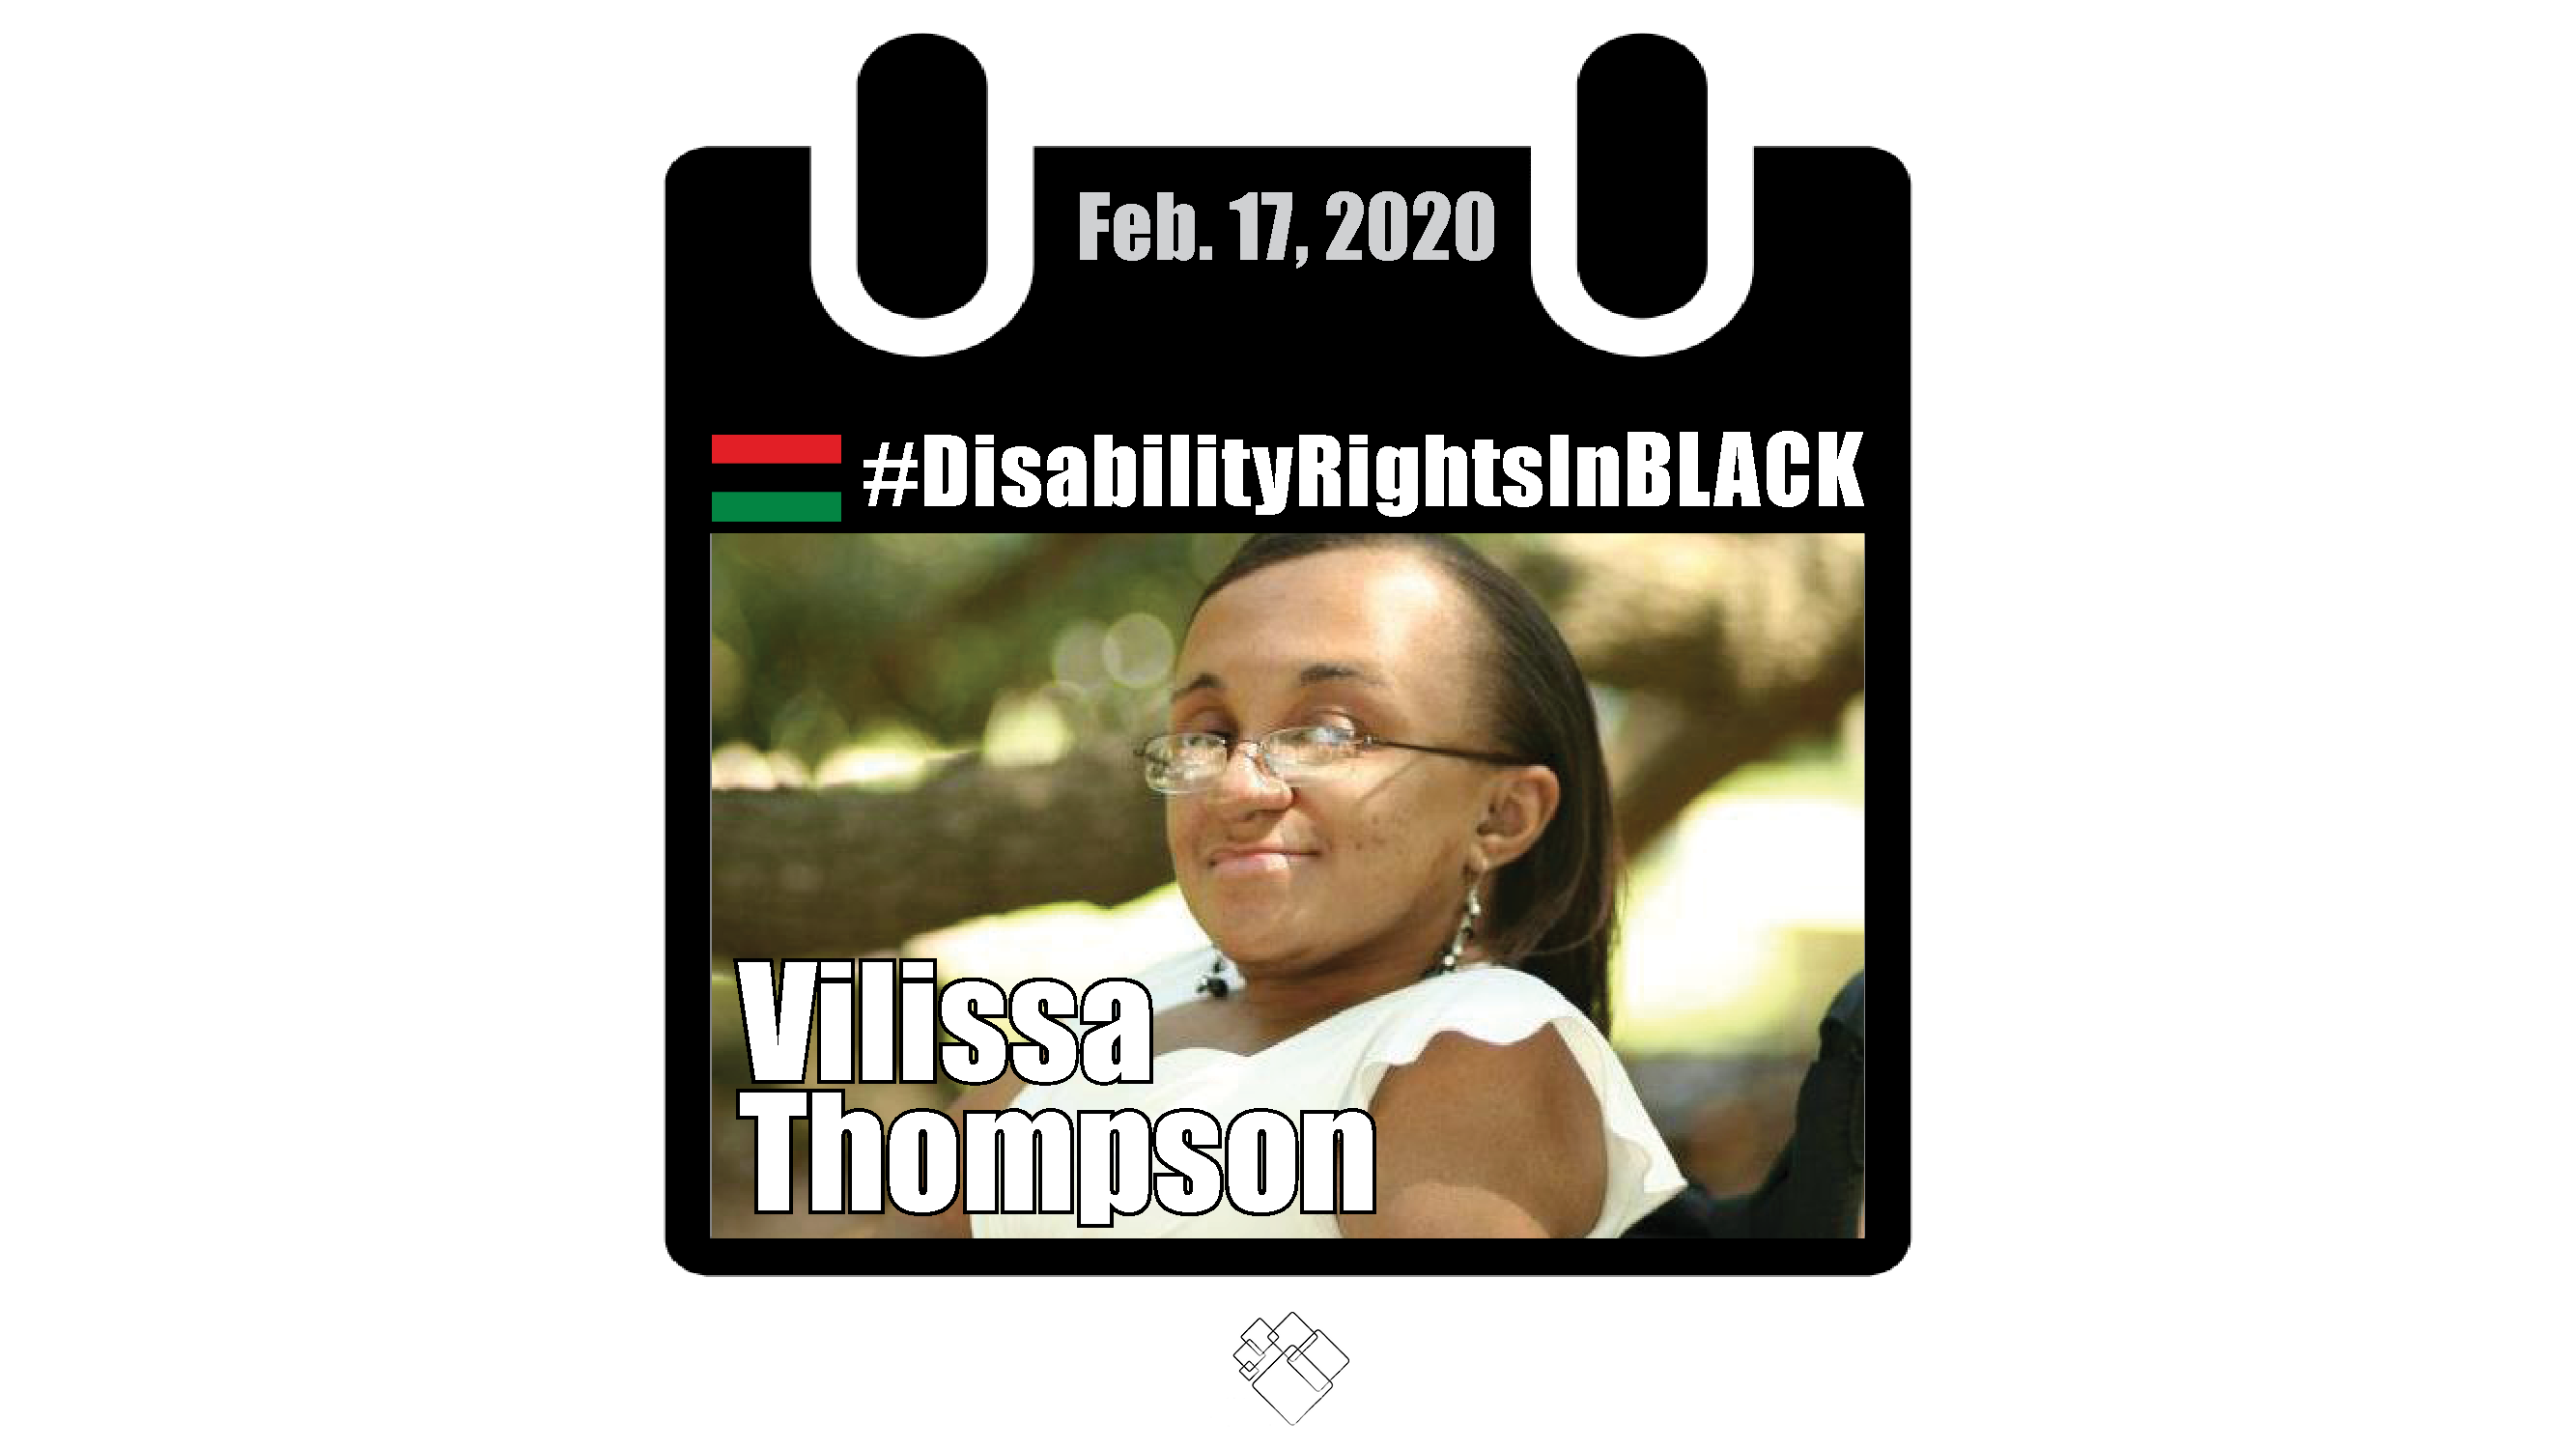 Vilissa looks to the camera over her shoulder. She wears a white top and sits in a black wheelchair. The Disability Rights in Black calendar style frame with the hashtag for the series at the top and the date, February 17 2020.